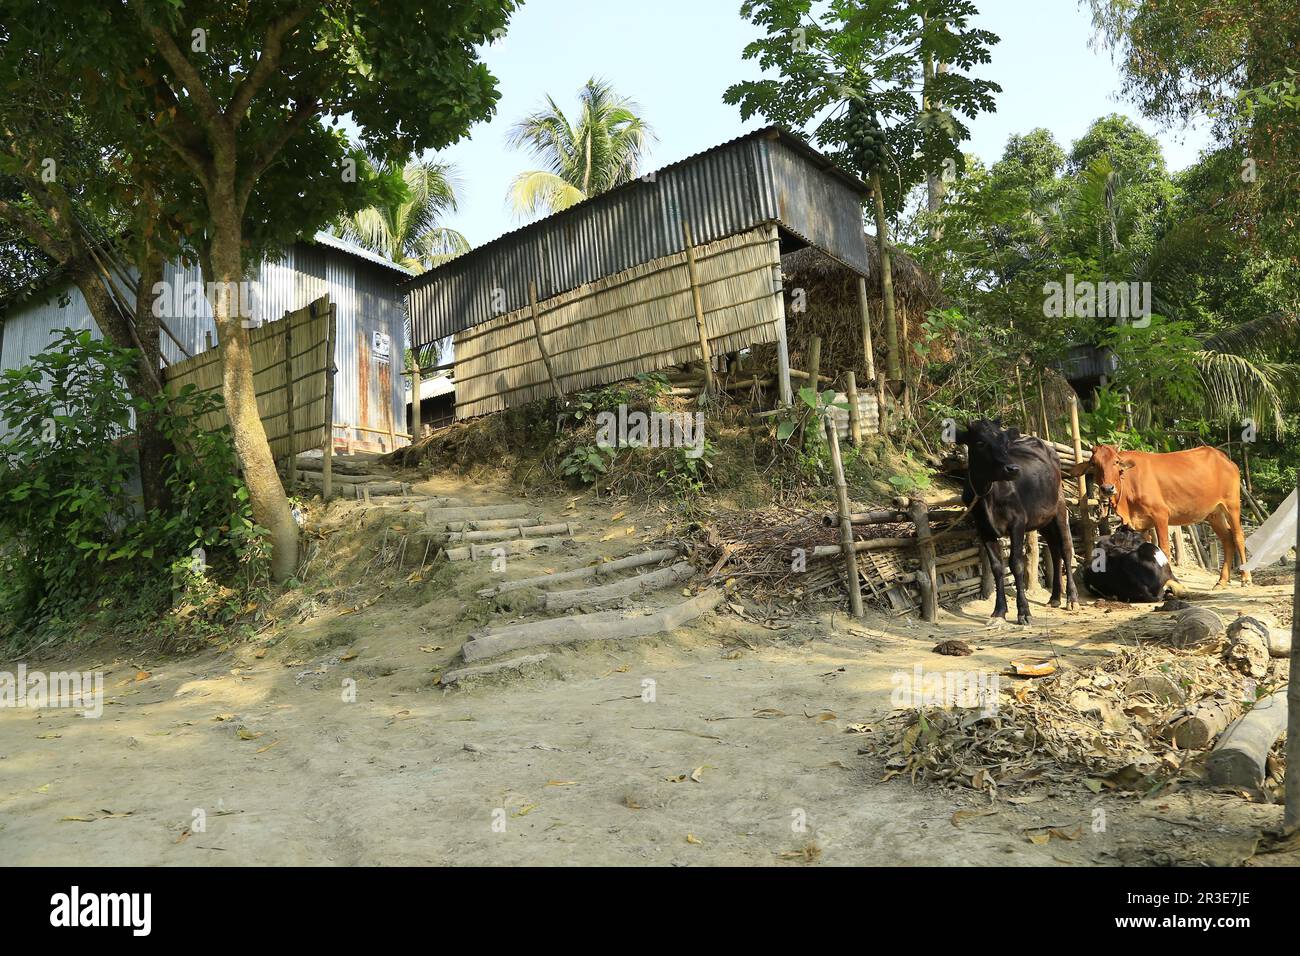 natural location Village house Picture in Bangladesh this house makes it is bamboo and natural elements and green environment Stock Photo